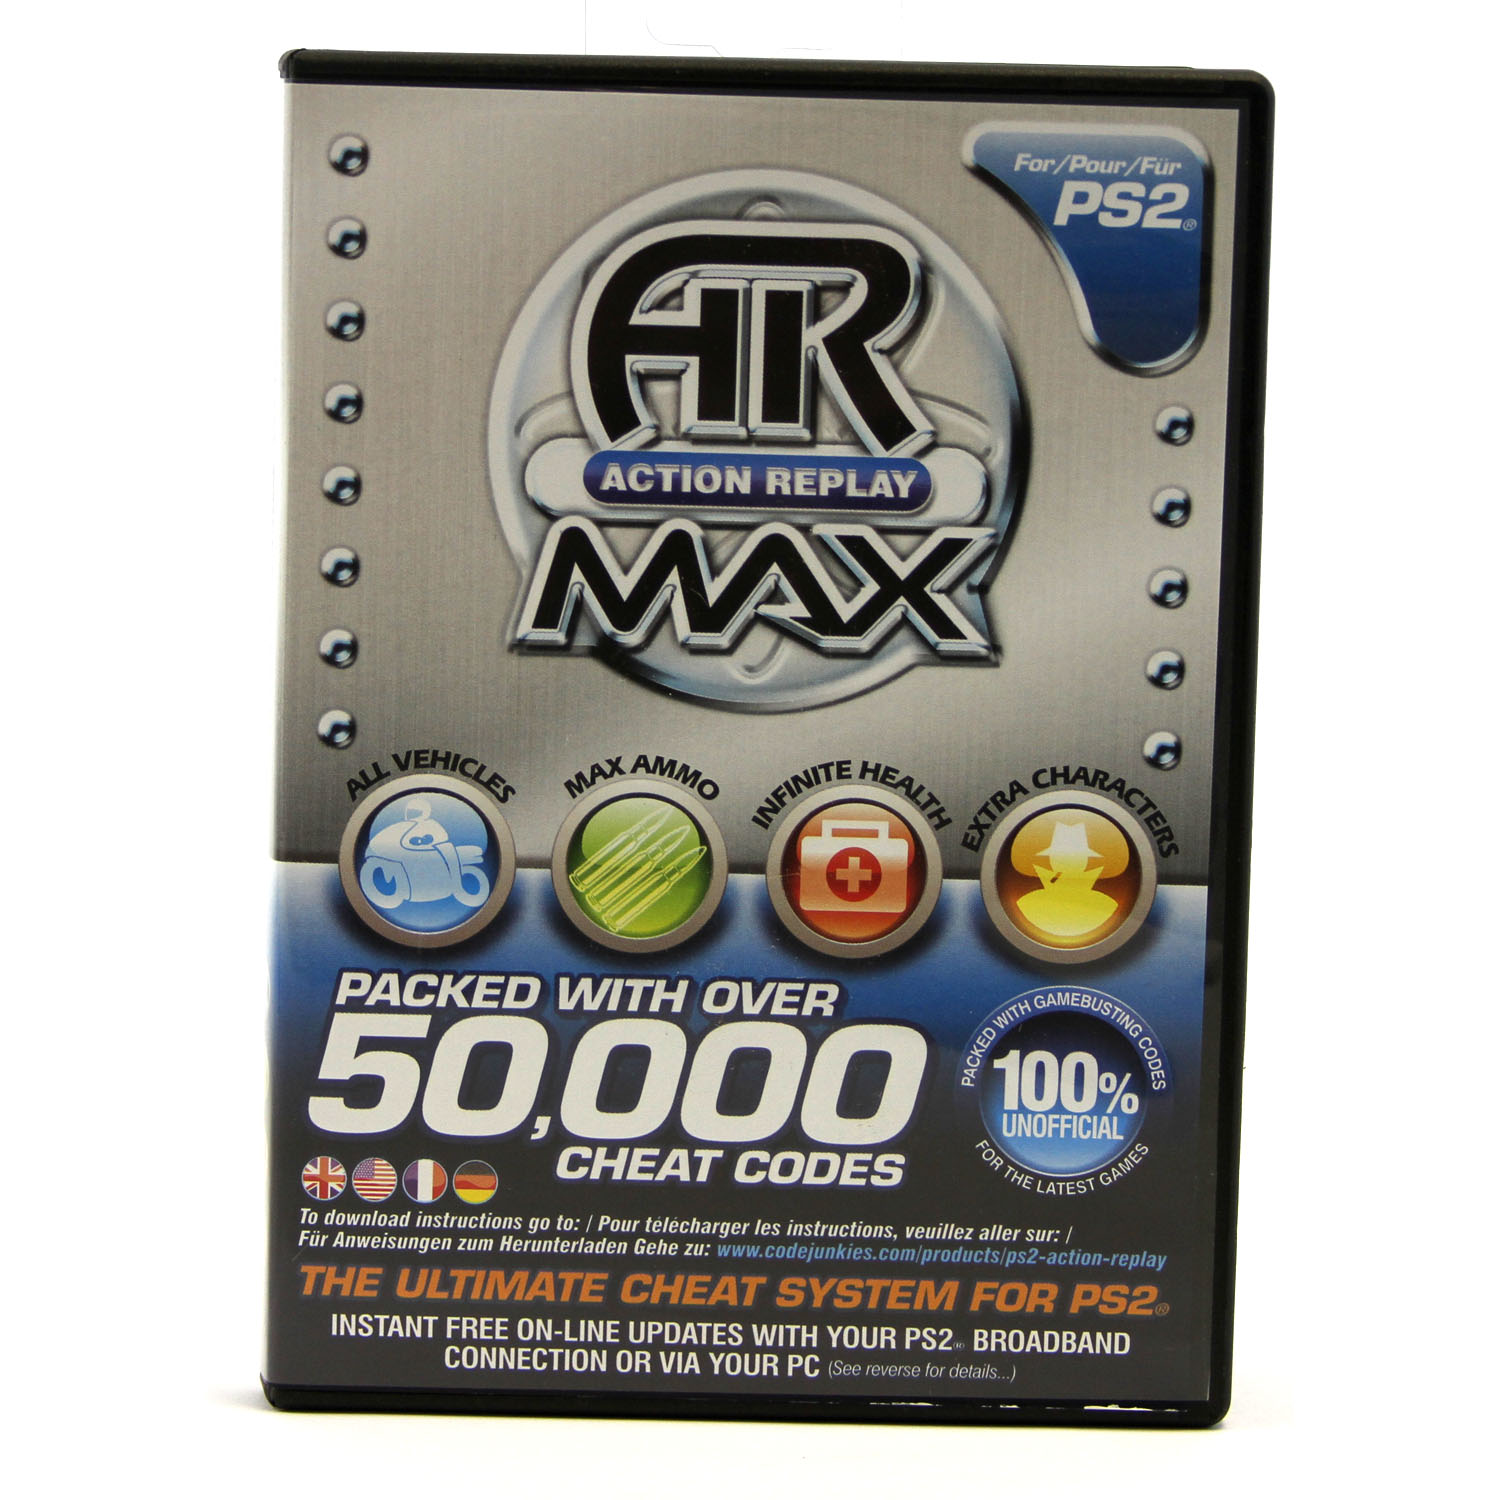 Action replay max ps2 rom